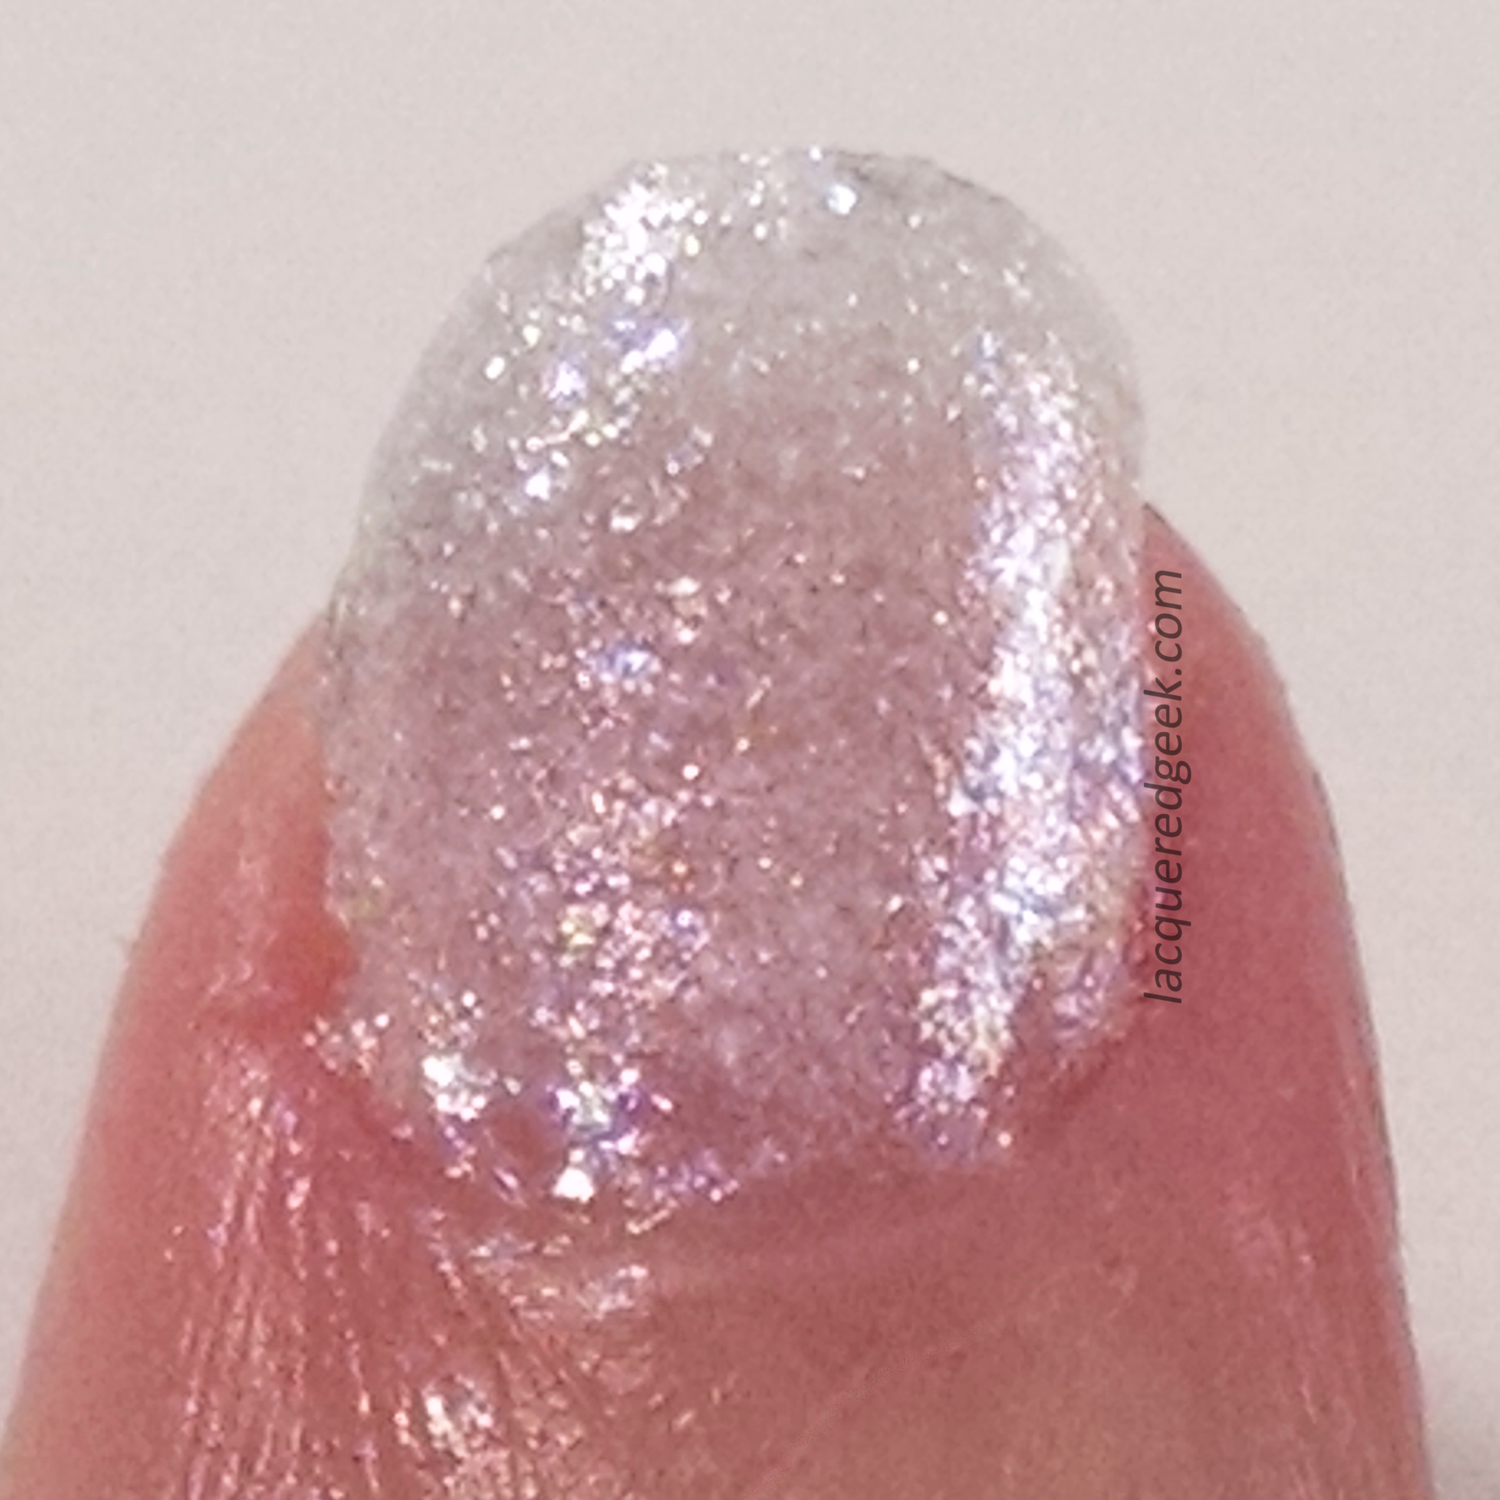 Digital Nails: Special Snowflake swatch